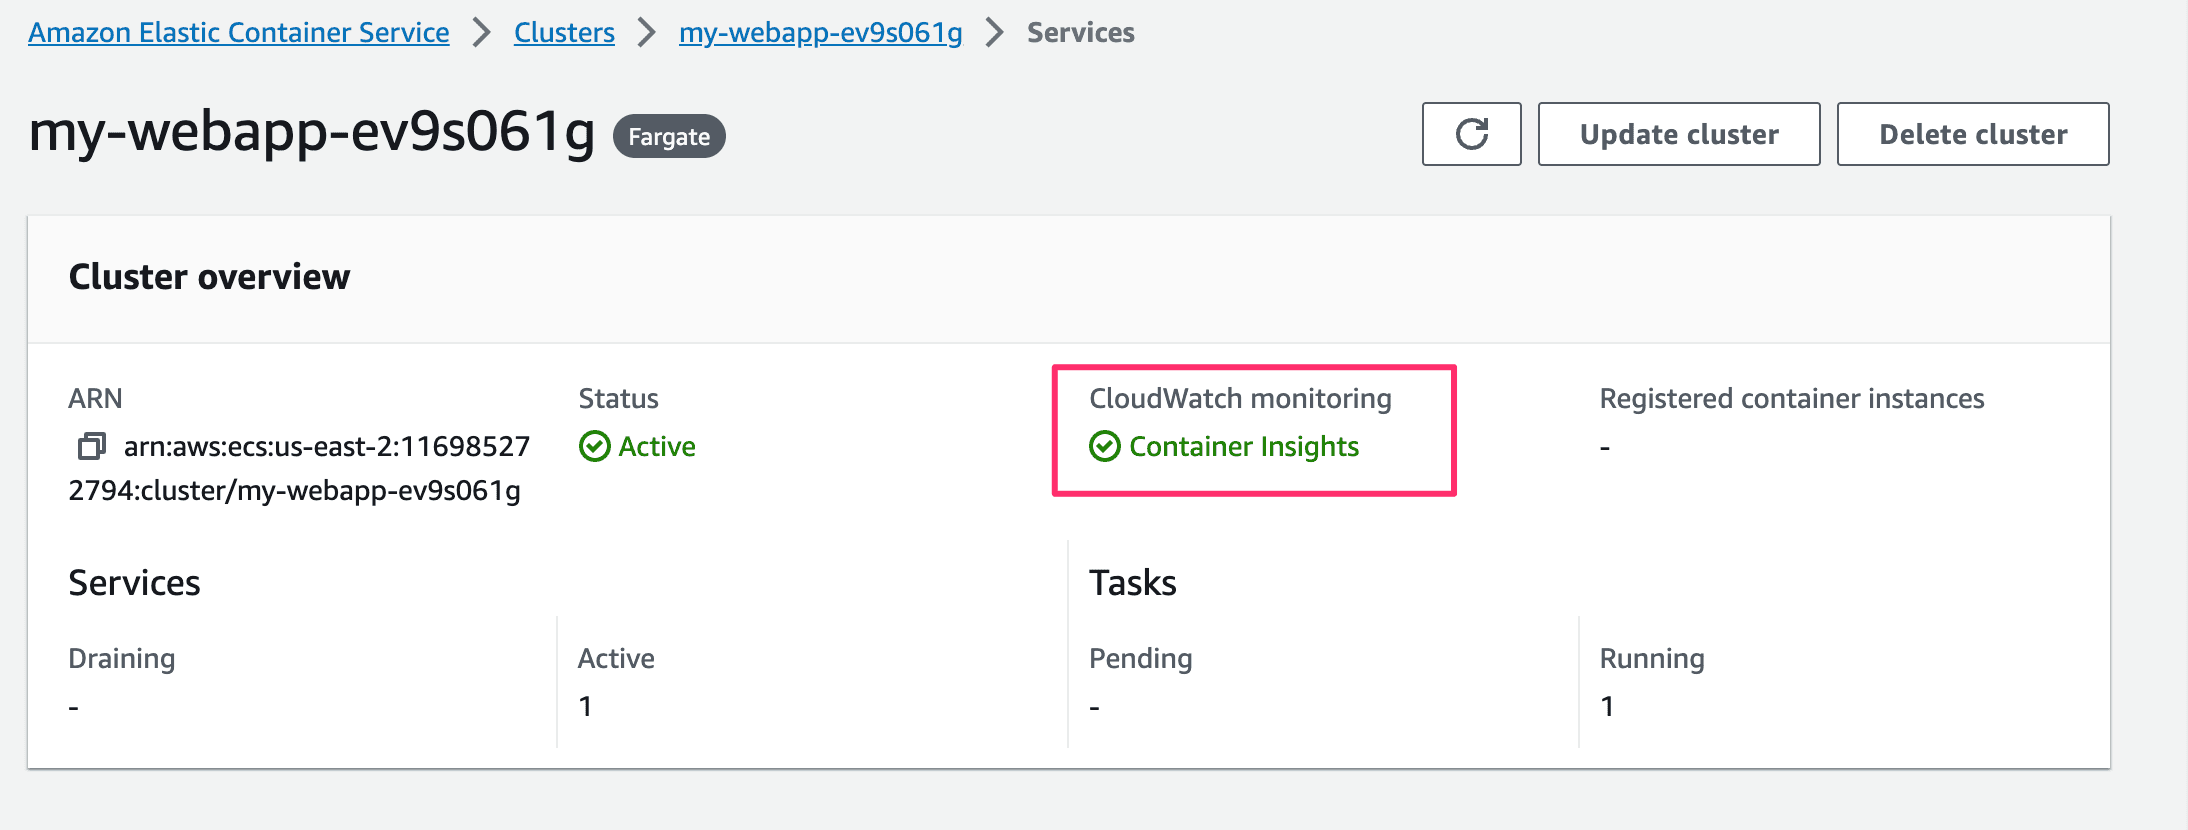 Verify that Container Insights is enabled in the AWS Console